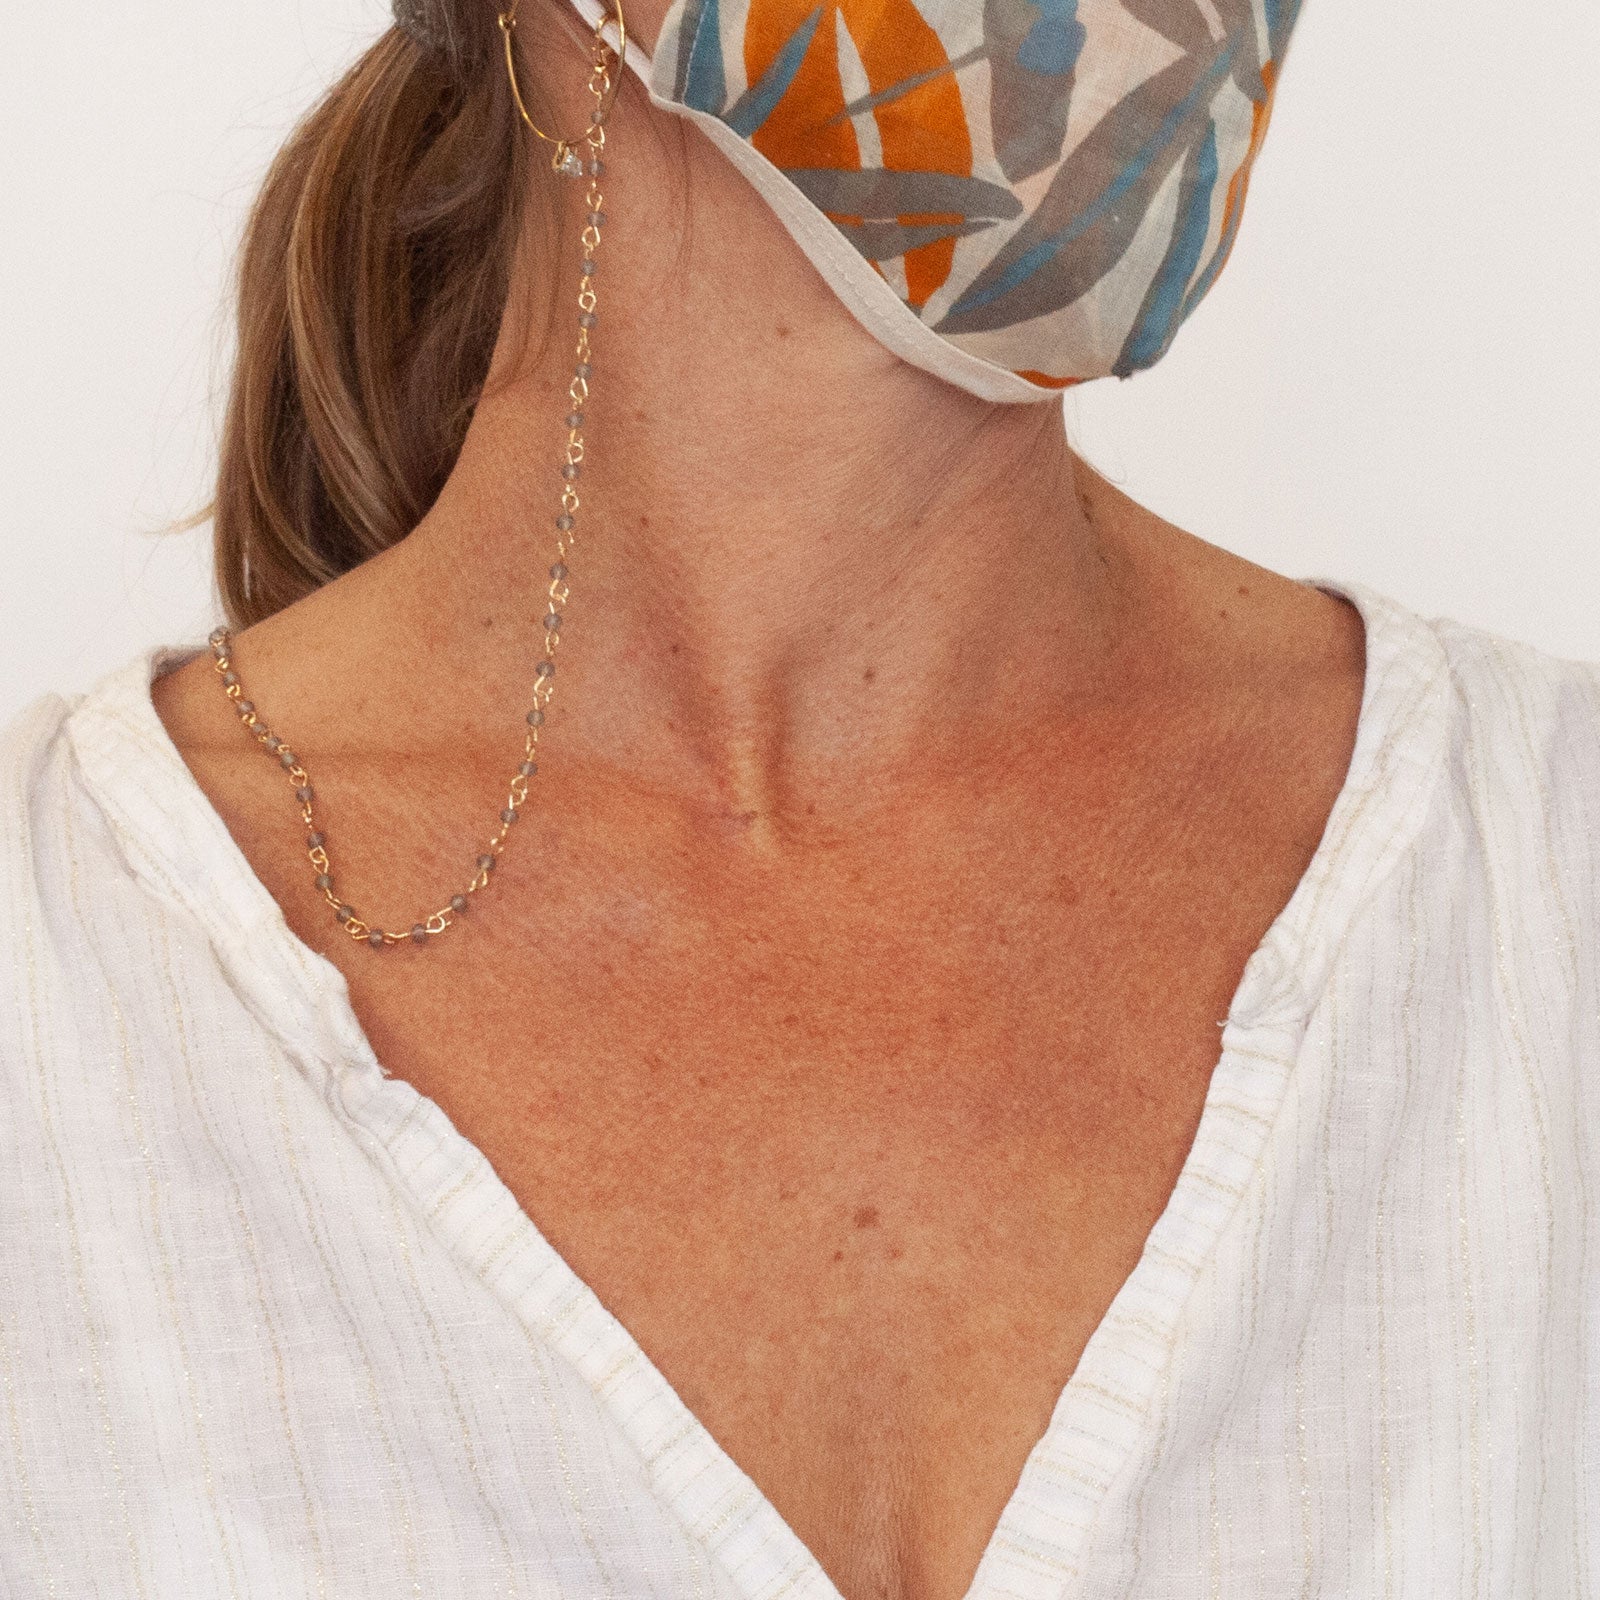 Face Mask Chain Lanyard Necklace with Grey Beads MASK-NECKLACE - rockflowerpaper